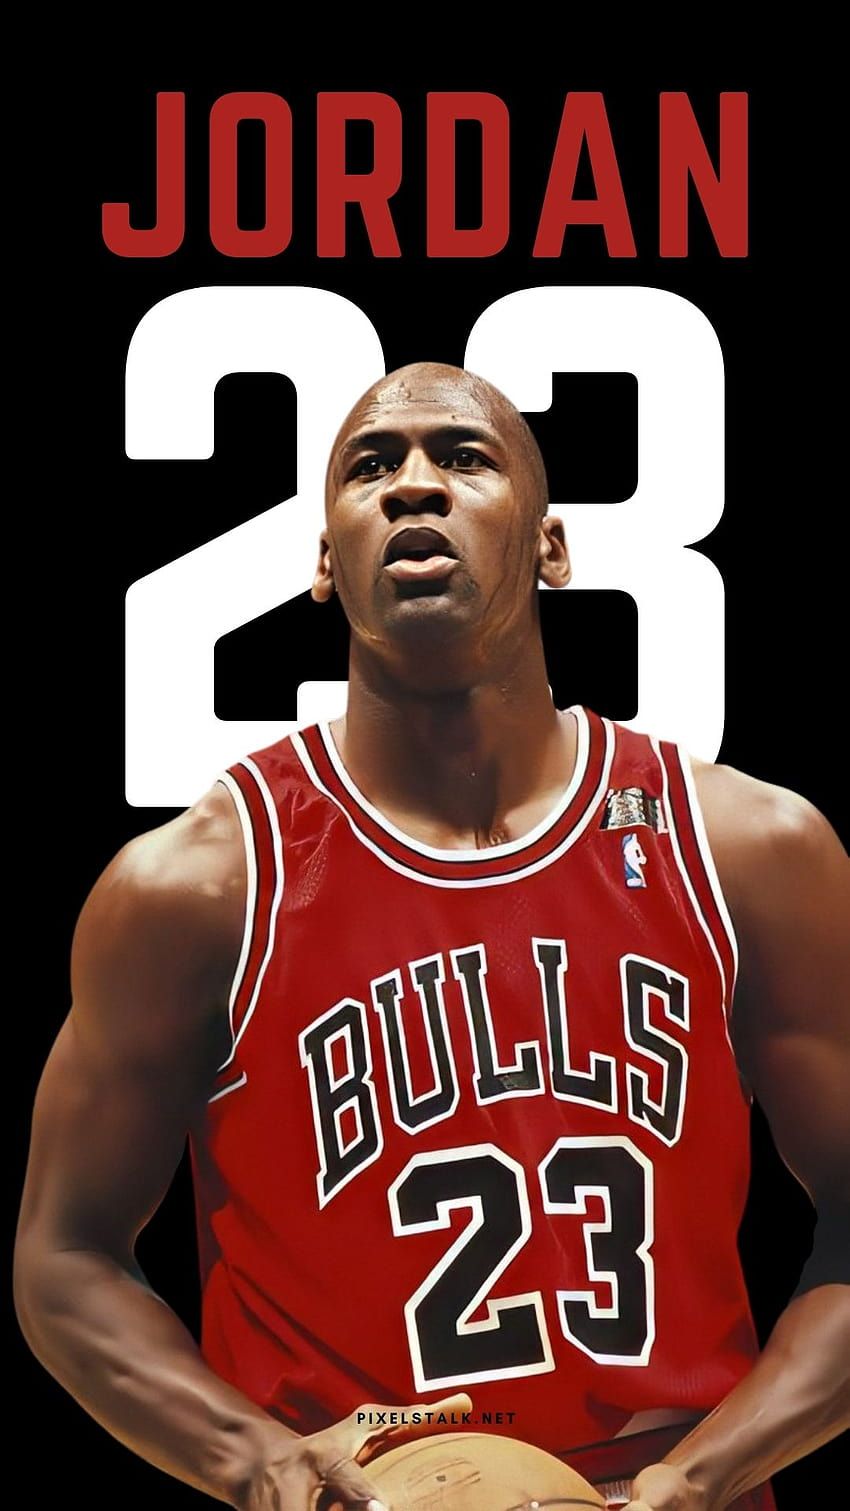 Michael Jordan 23 wallpaper for iPhone and Android devices. Get the full size image and download for free. - Michael Jordan